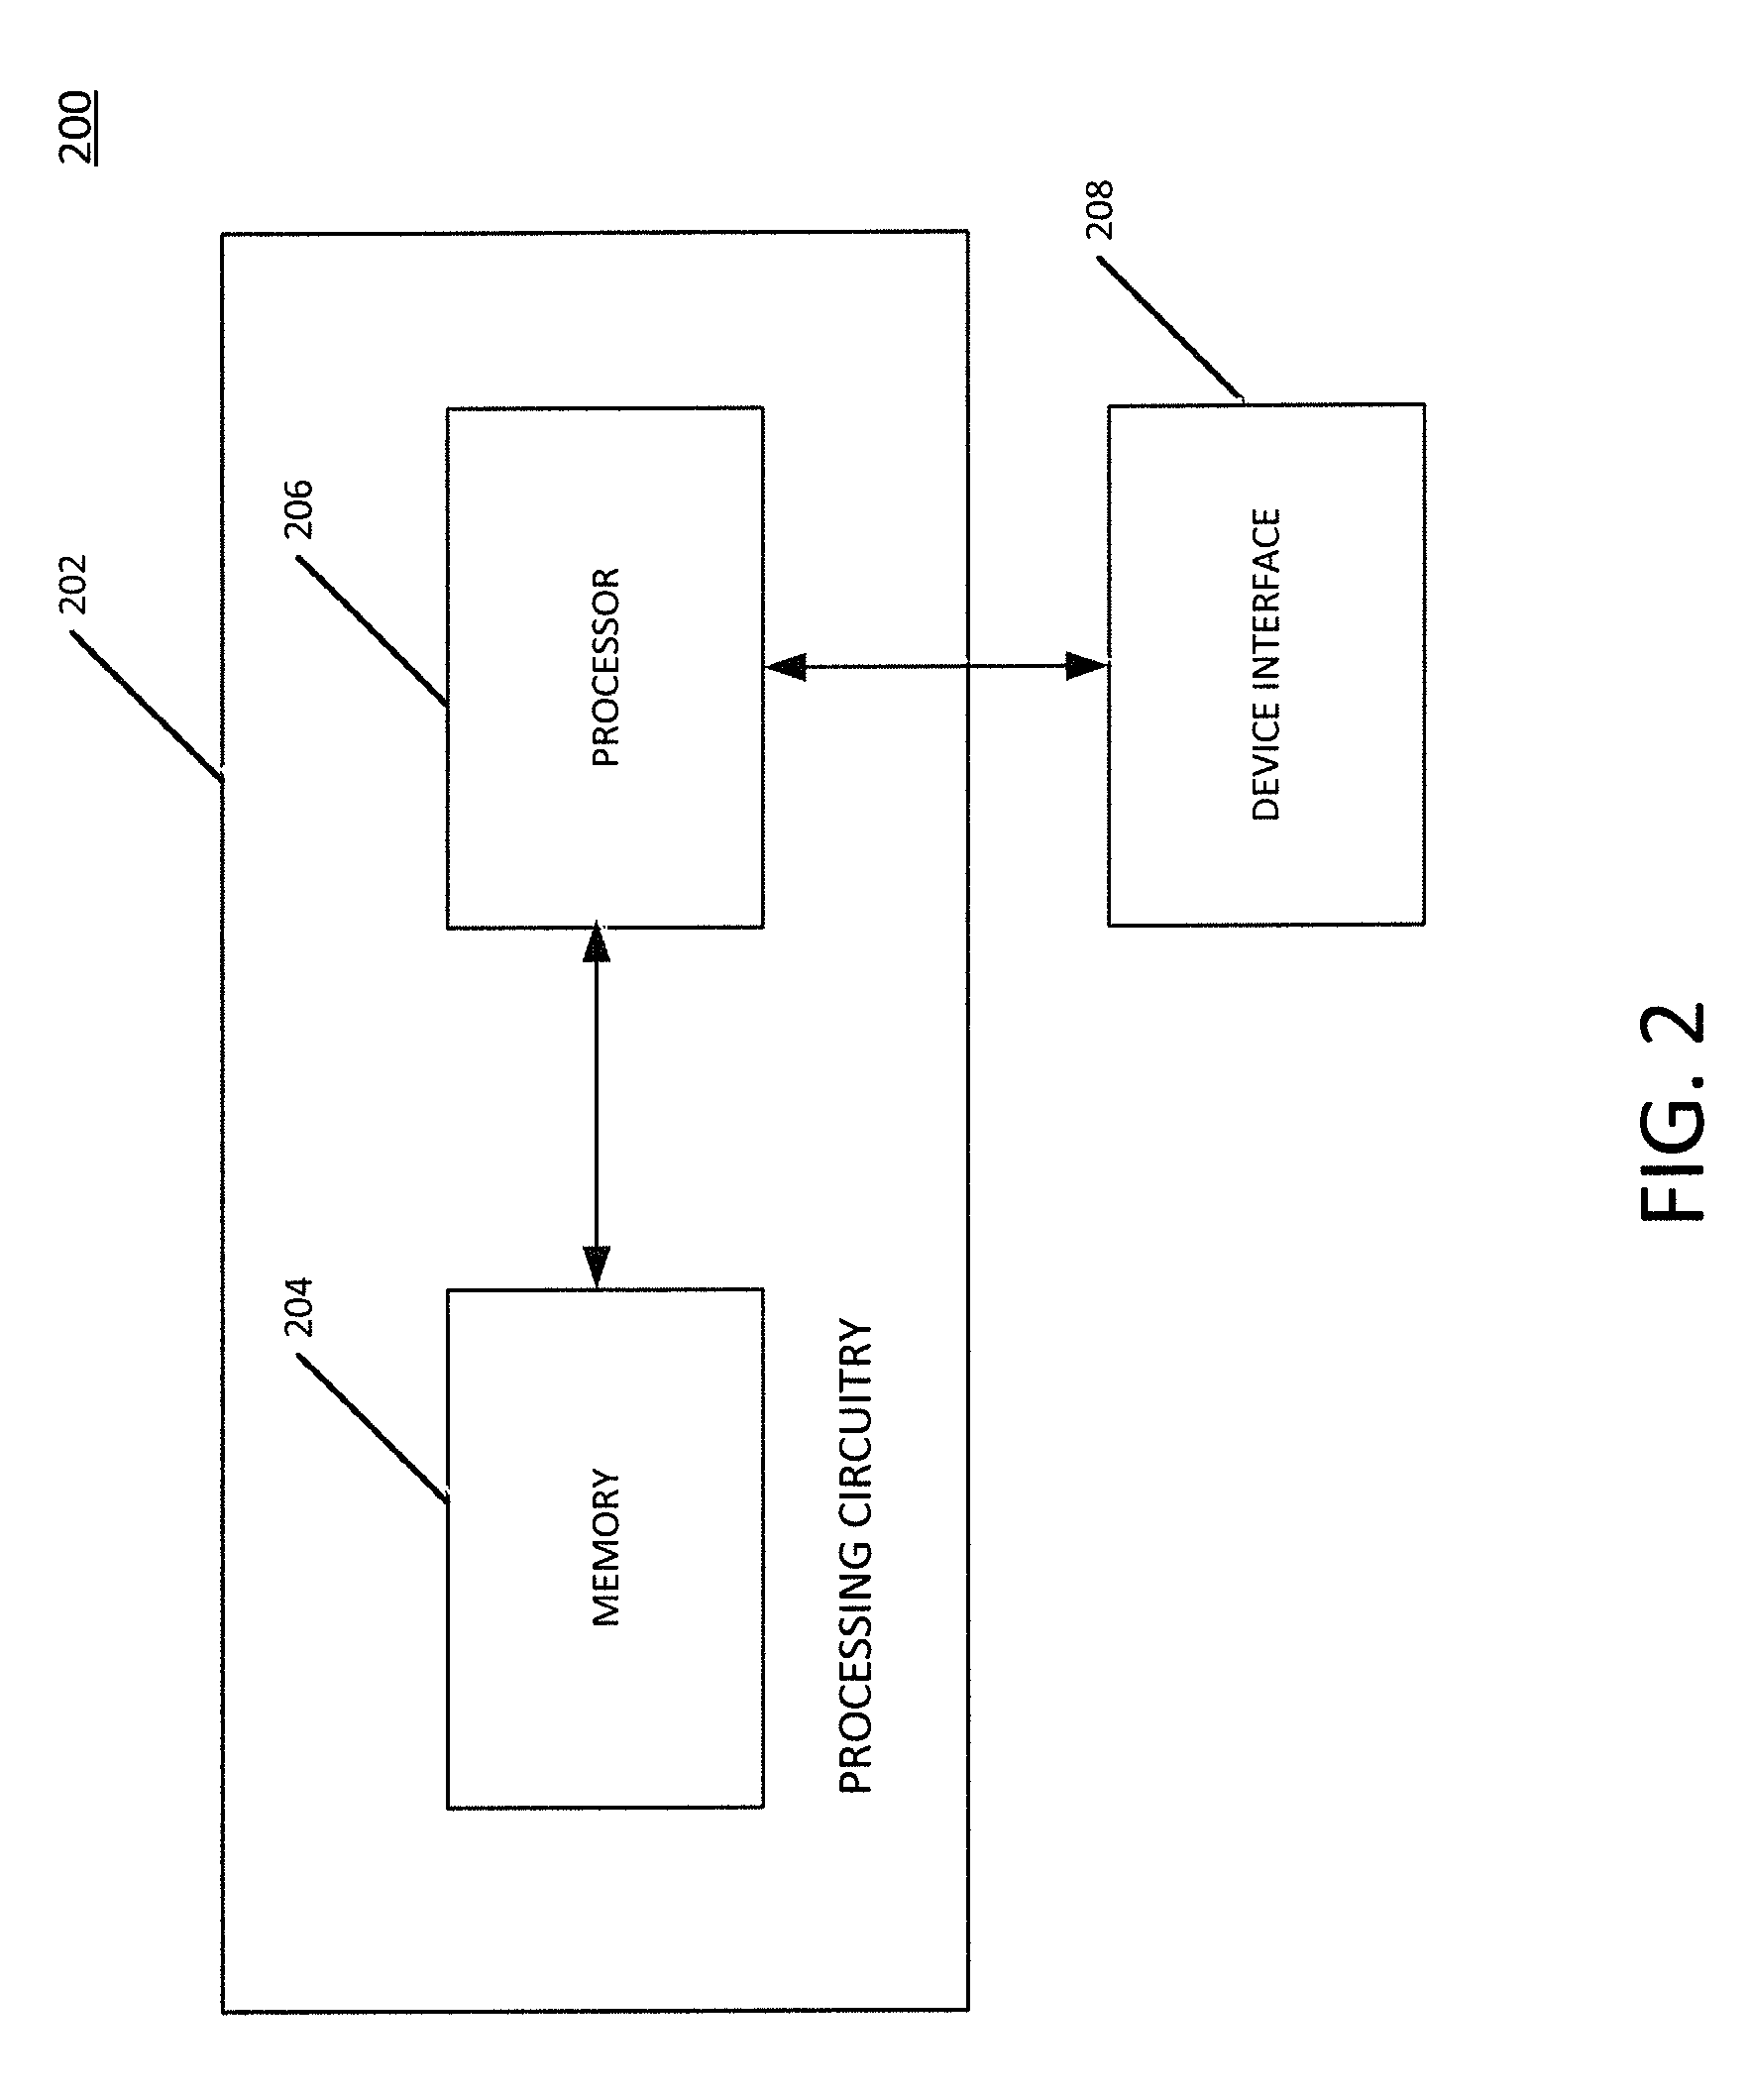 Method and apparatus for providing improved detection of overlapping networks